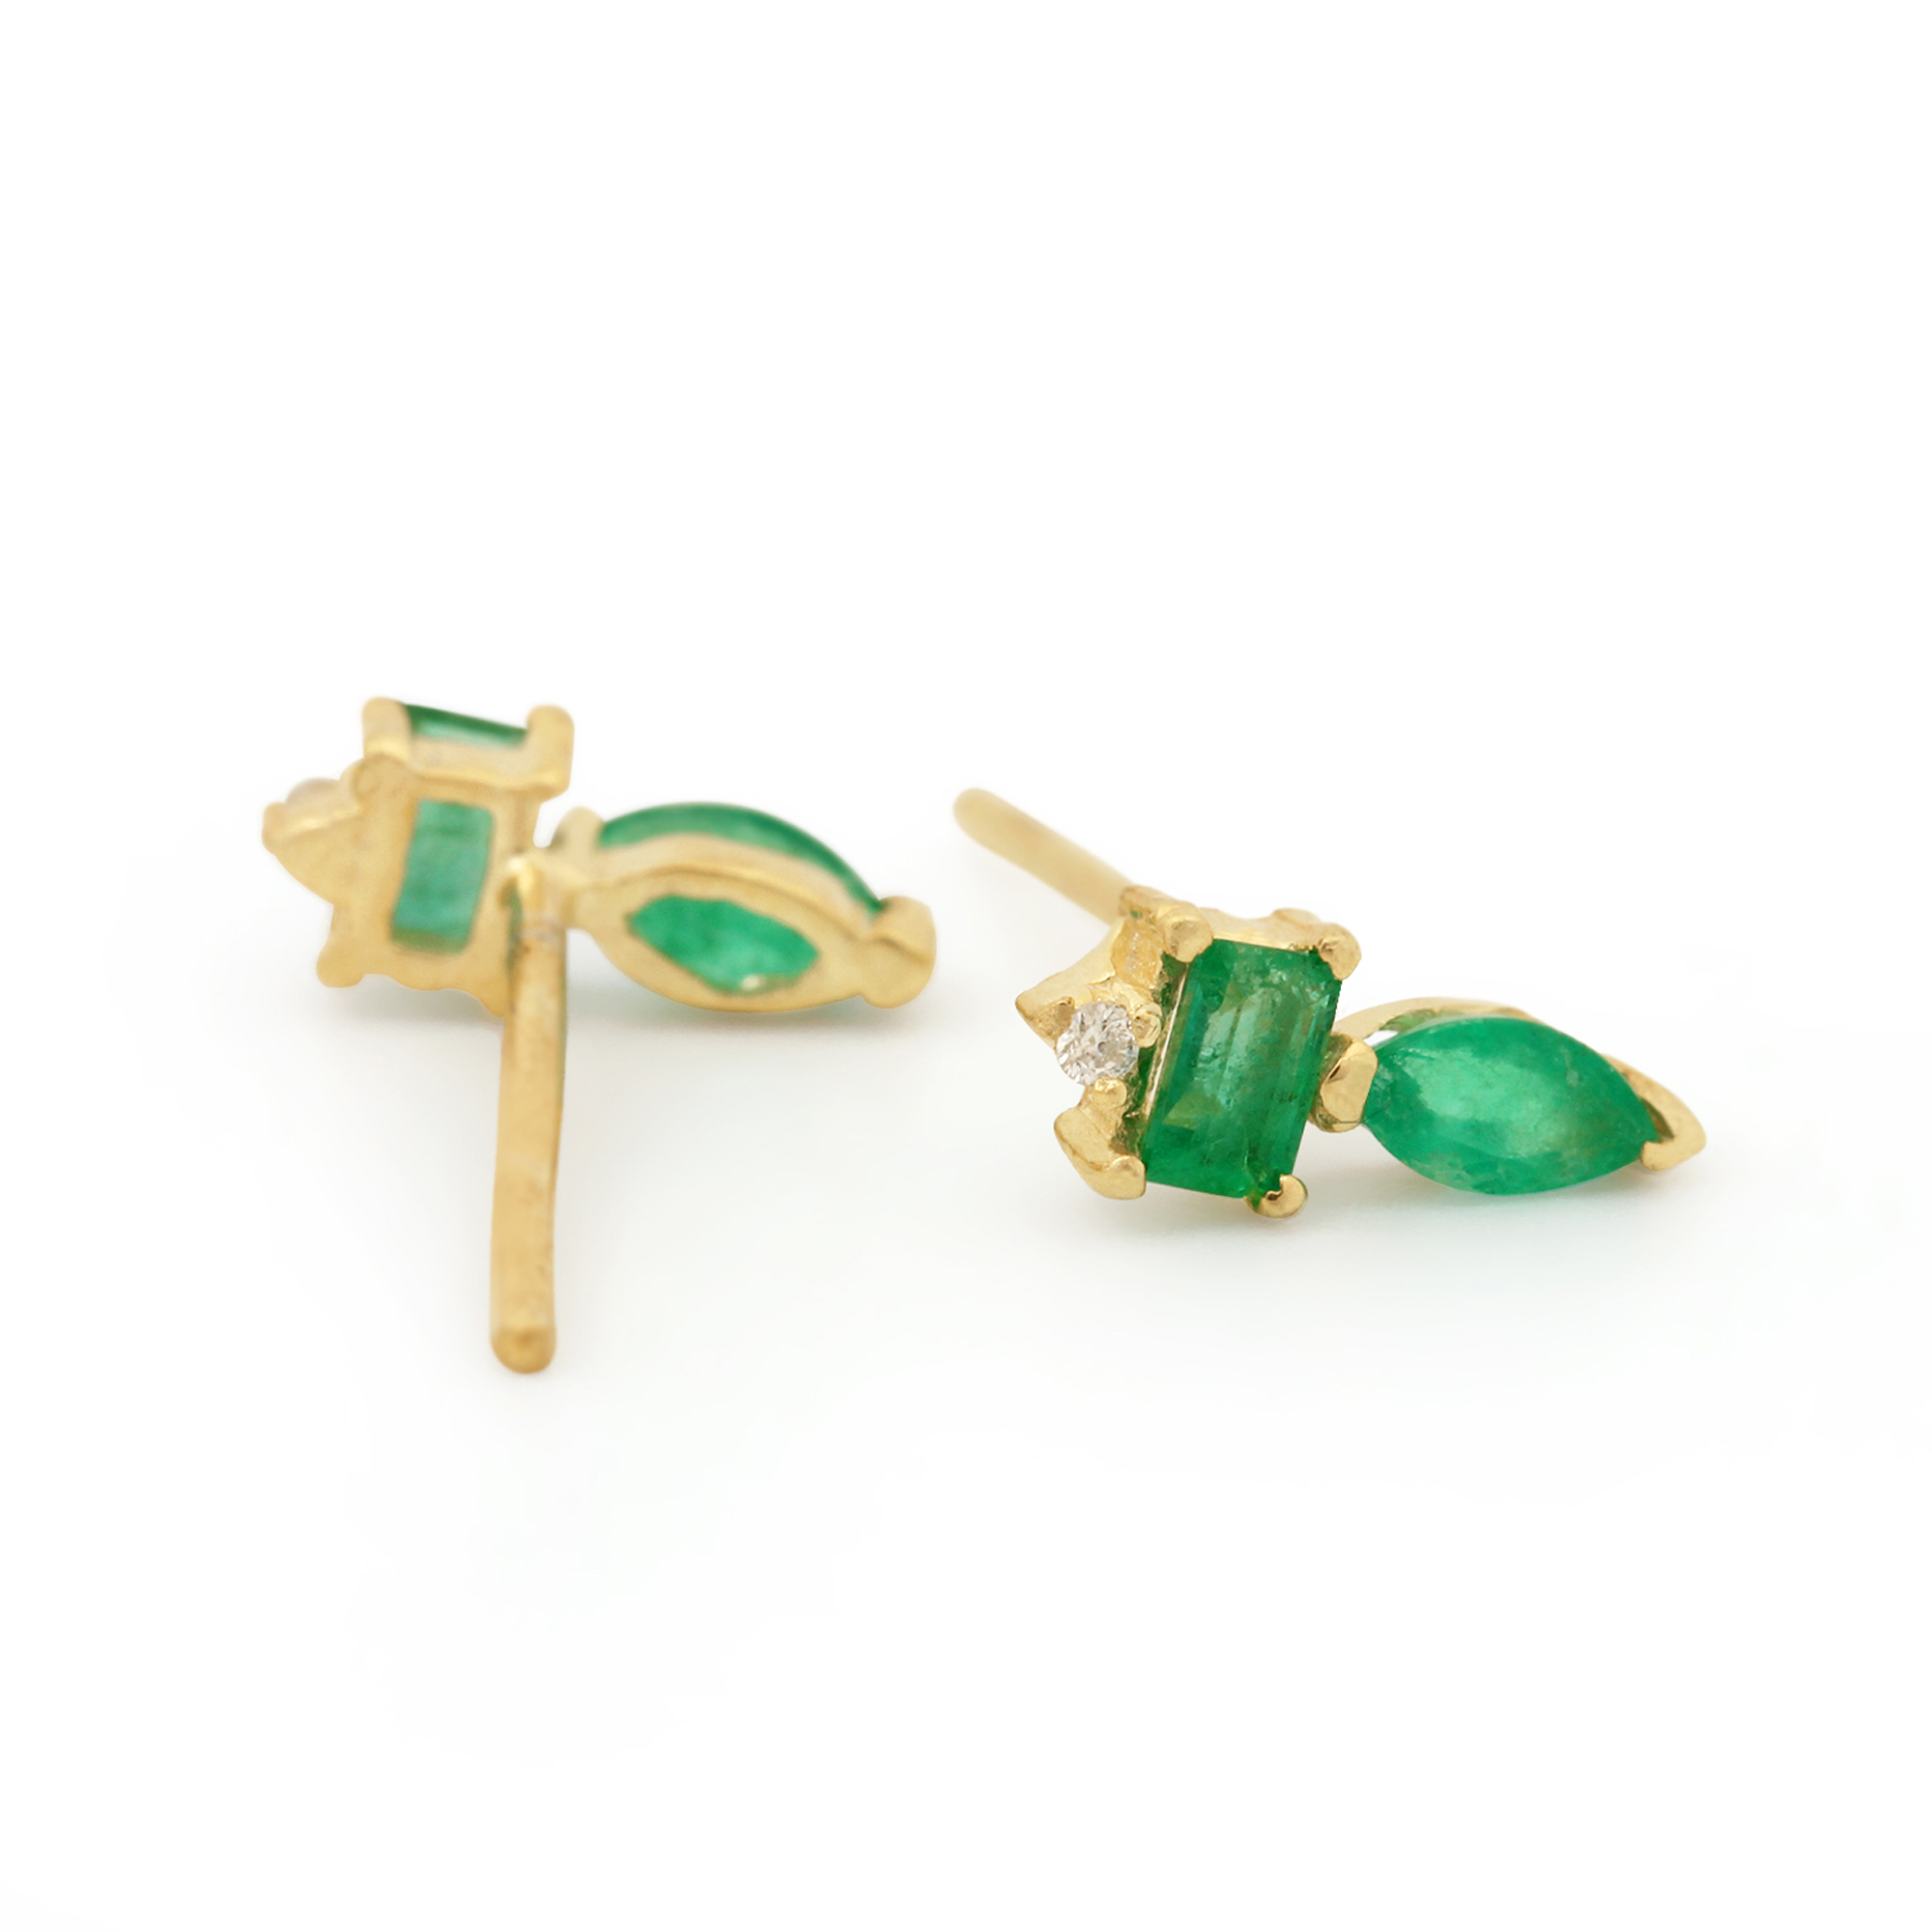 14k Gold Solitaire Stud Earrings Adorned With Natural Diamond & Emerald